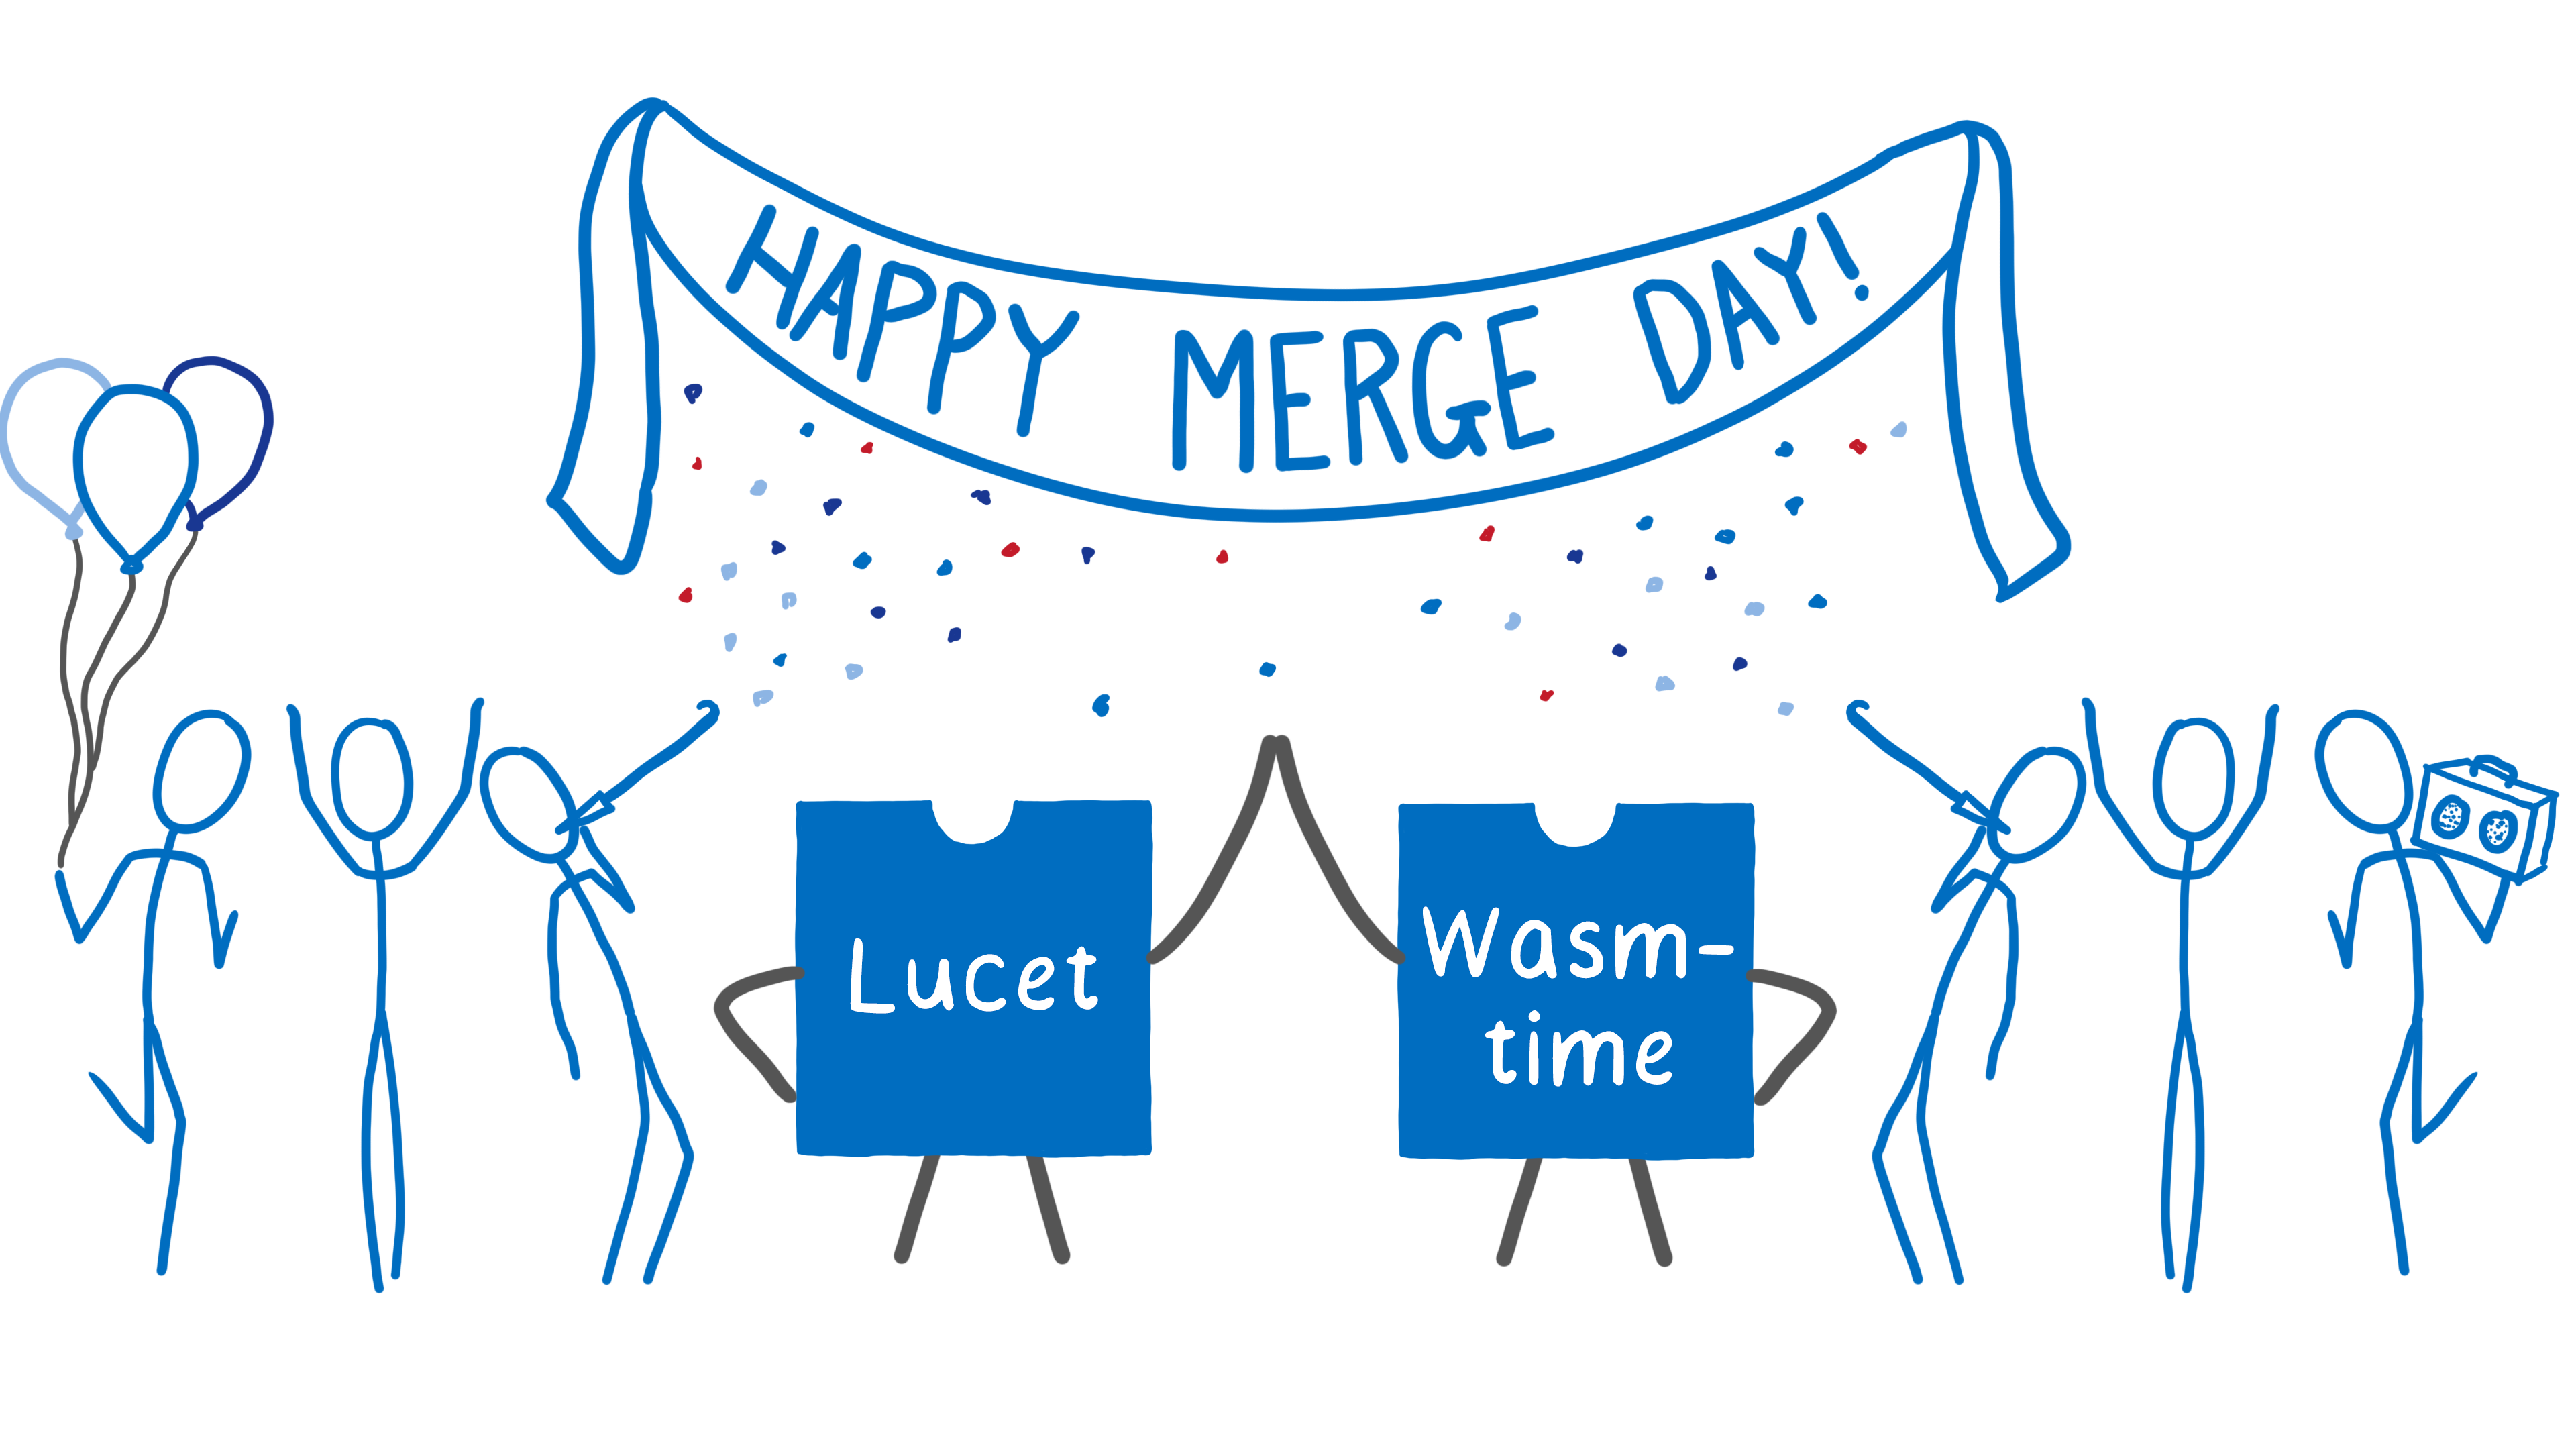 "Lucet and Wastime high fiving under a Happy Merge Day banner, while engineers party around them"